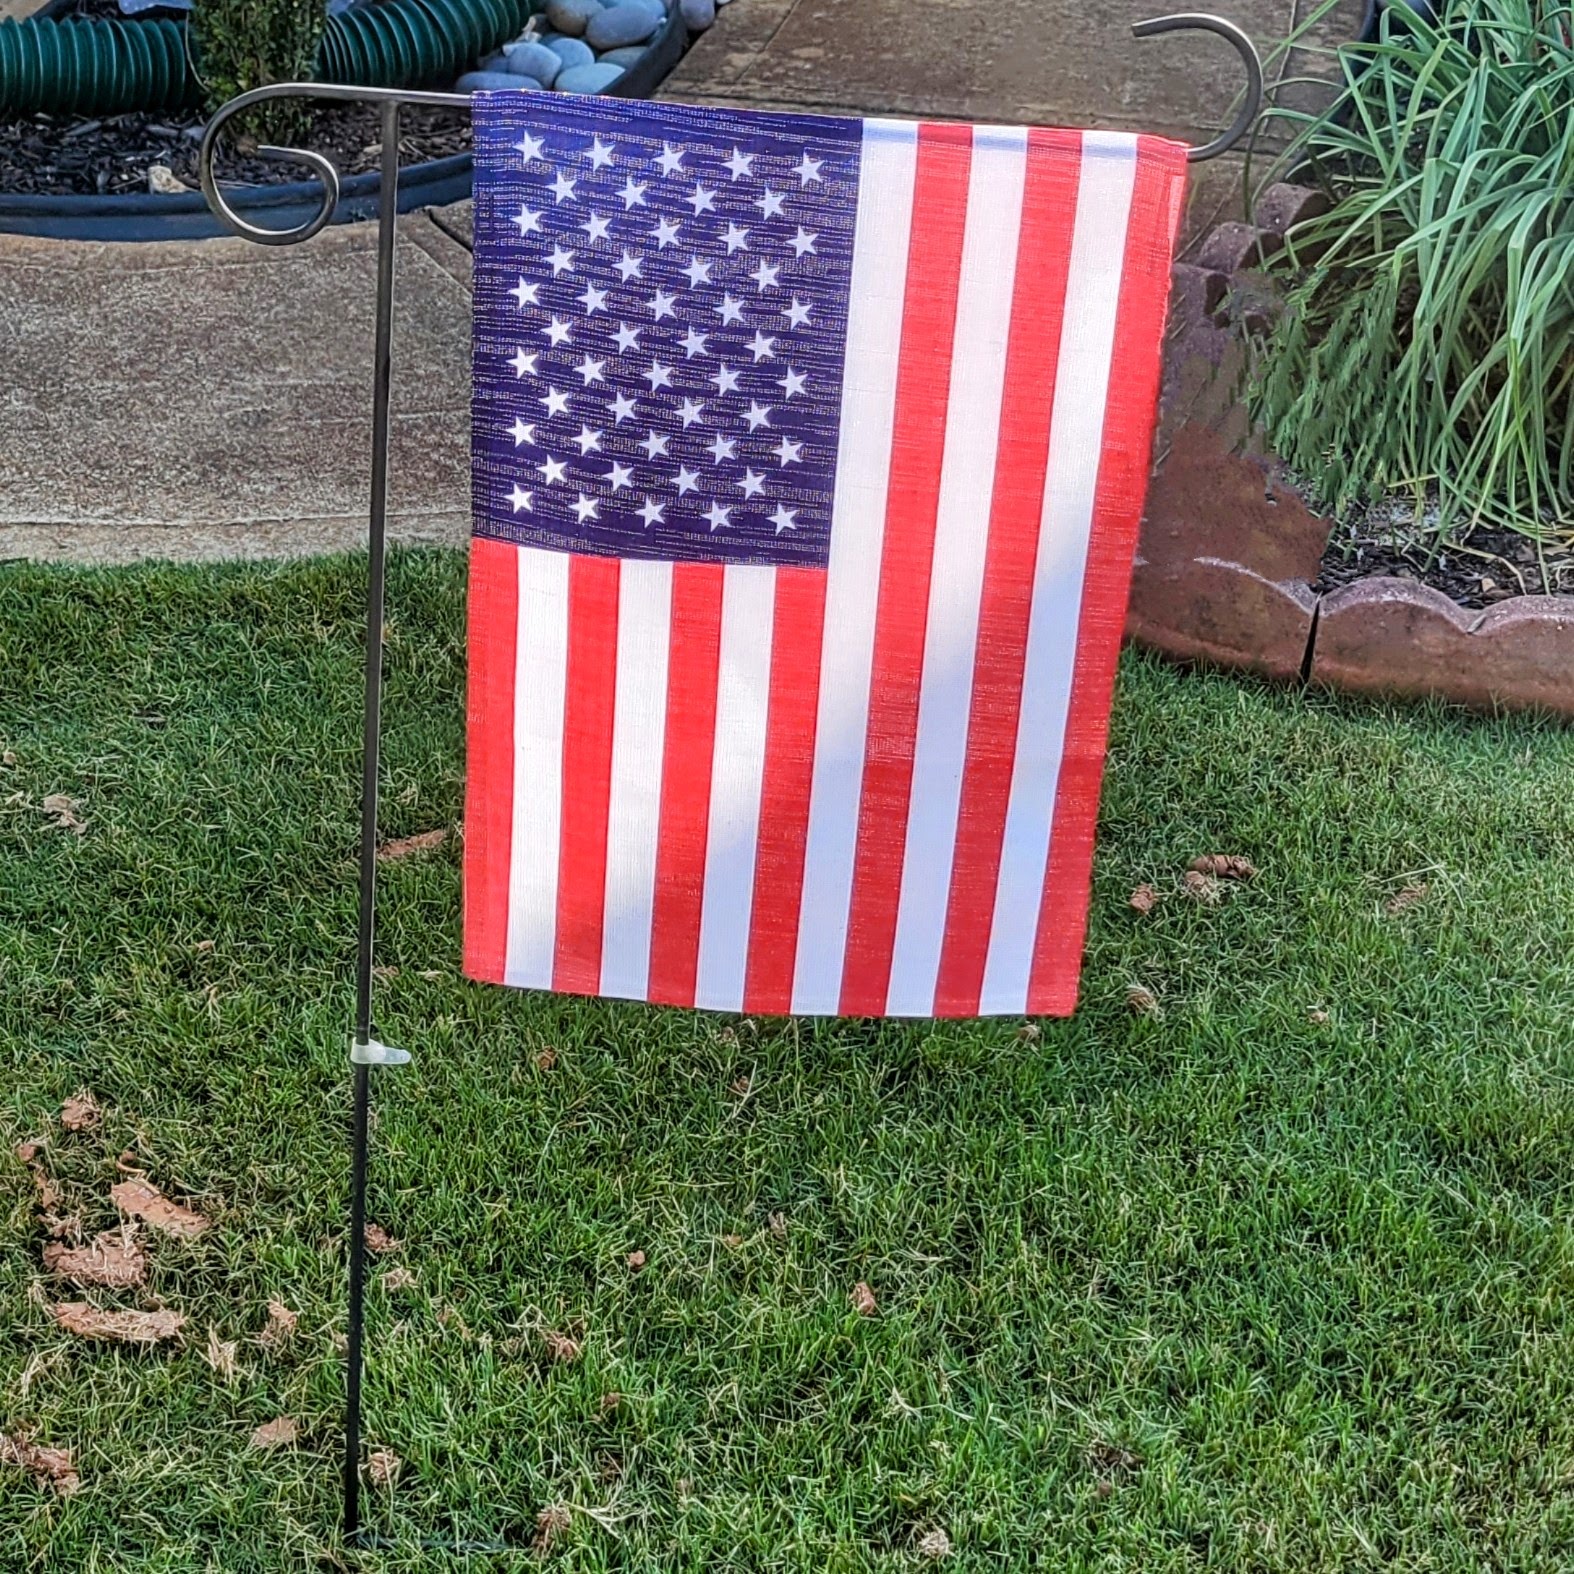 A small American flag hanging vertically in a garden.